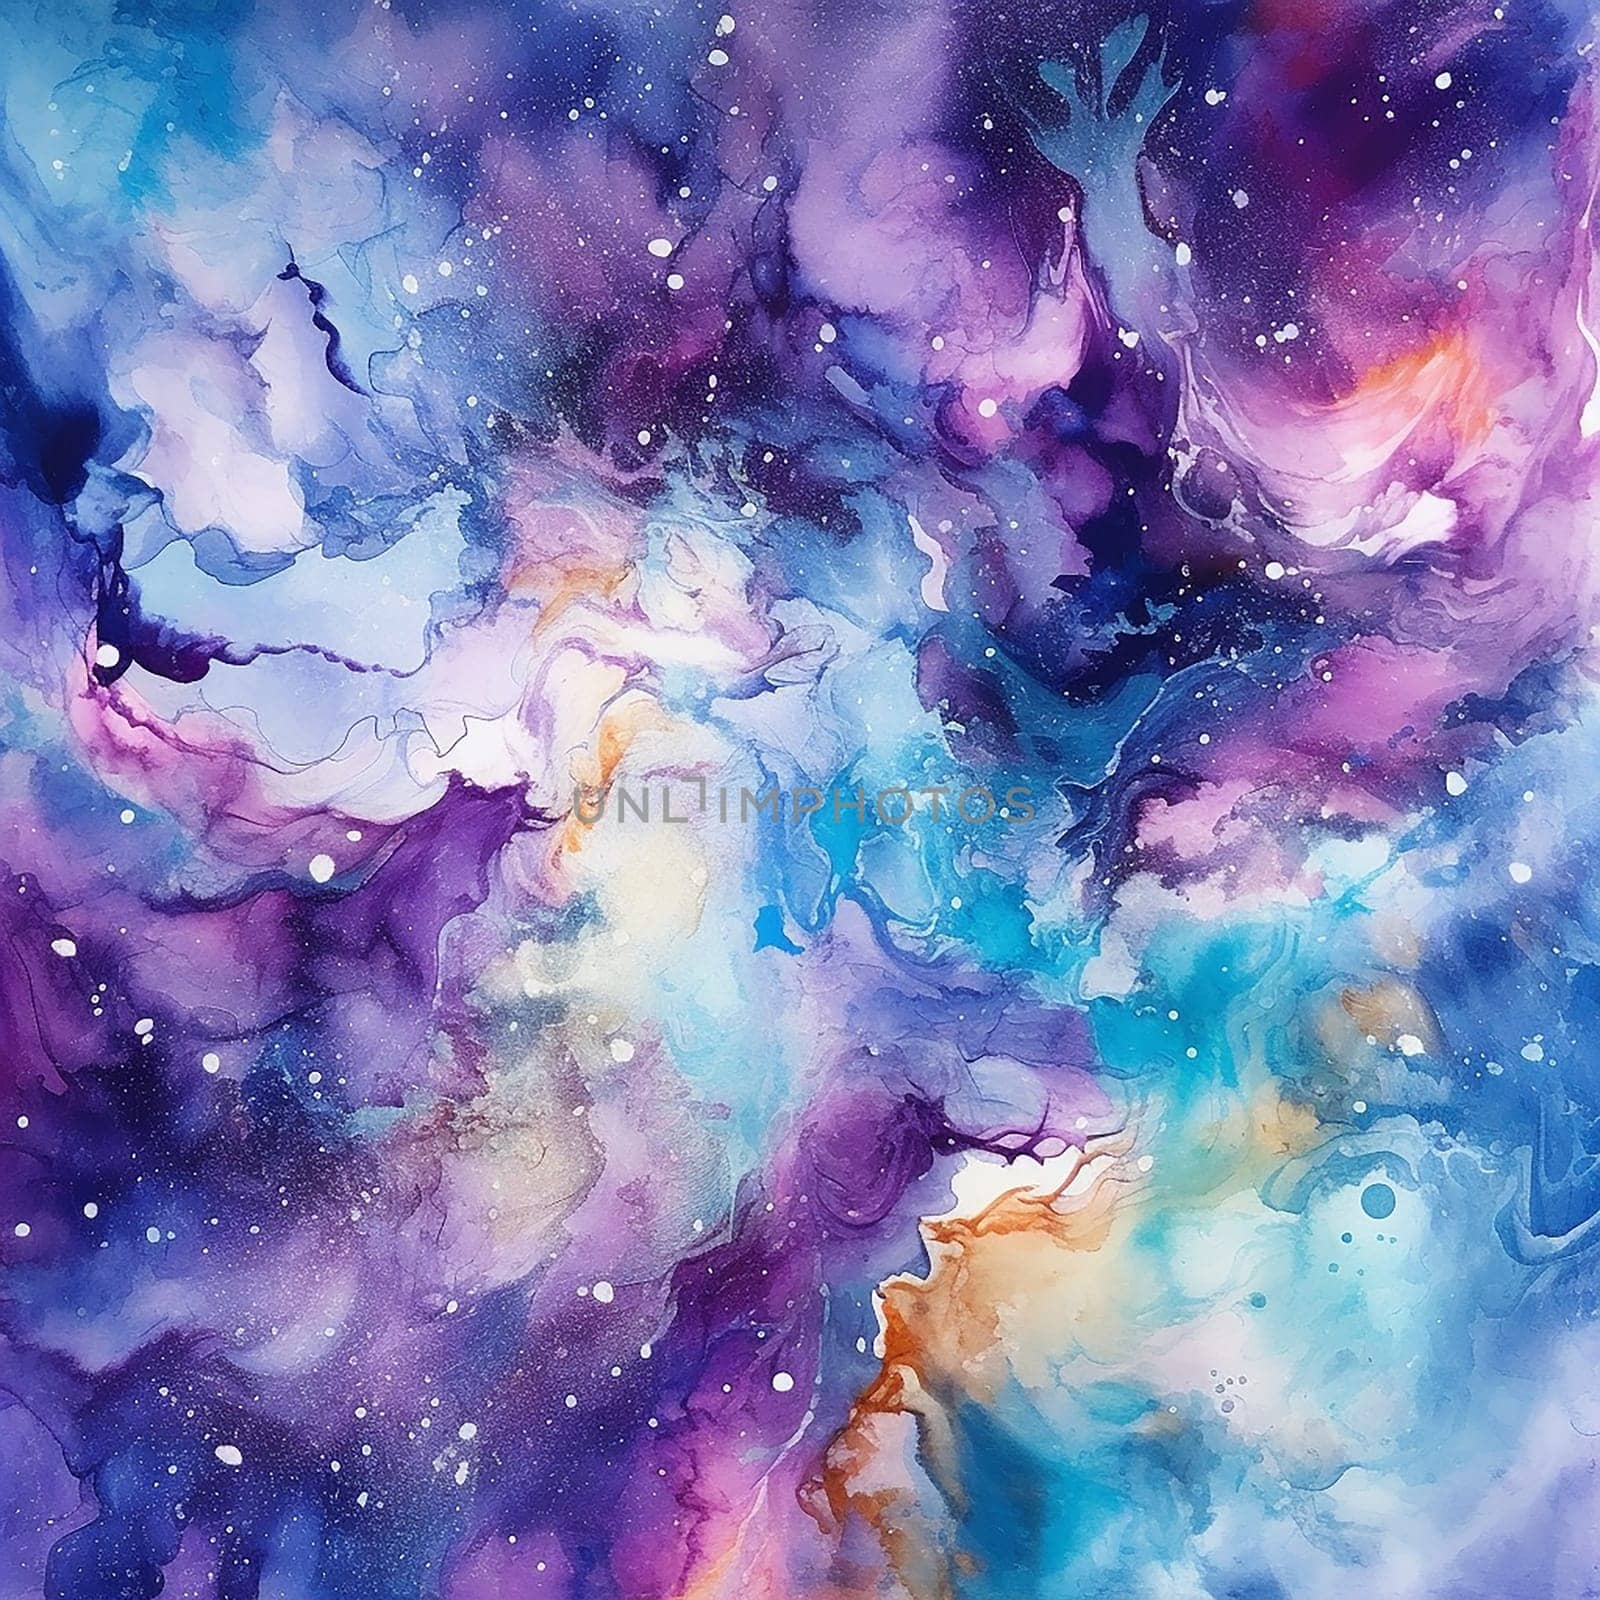 Galaxy background with stars and starry night, landscape of an astronomy sky by Hype2art